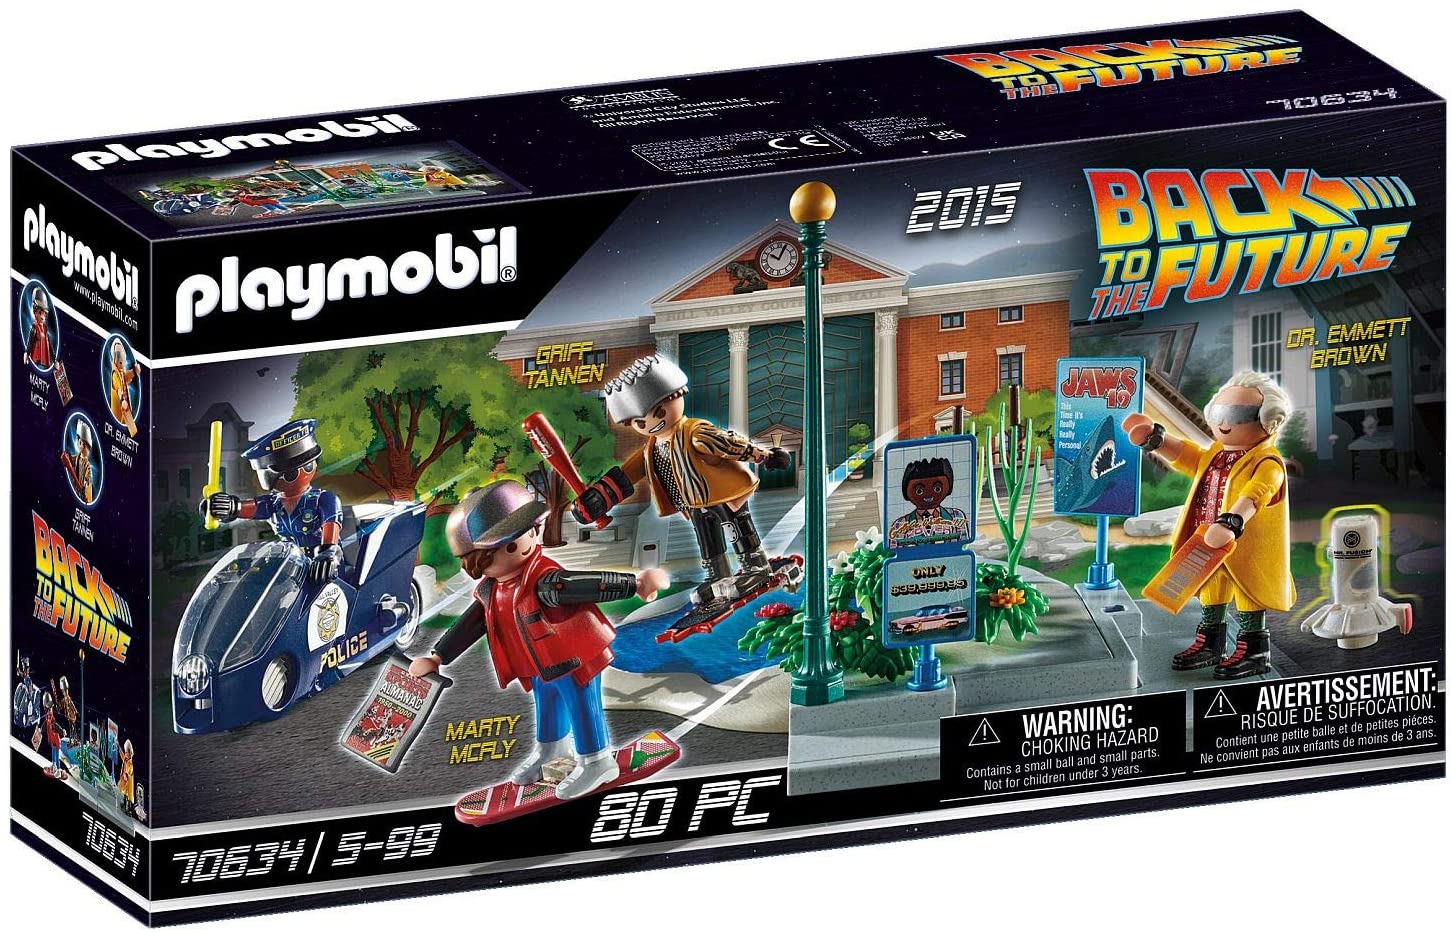 Playmobil Back to The Future: Marty's Pickup Truck $30.79, Hoverboard Chase $22.89